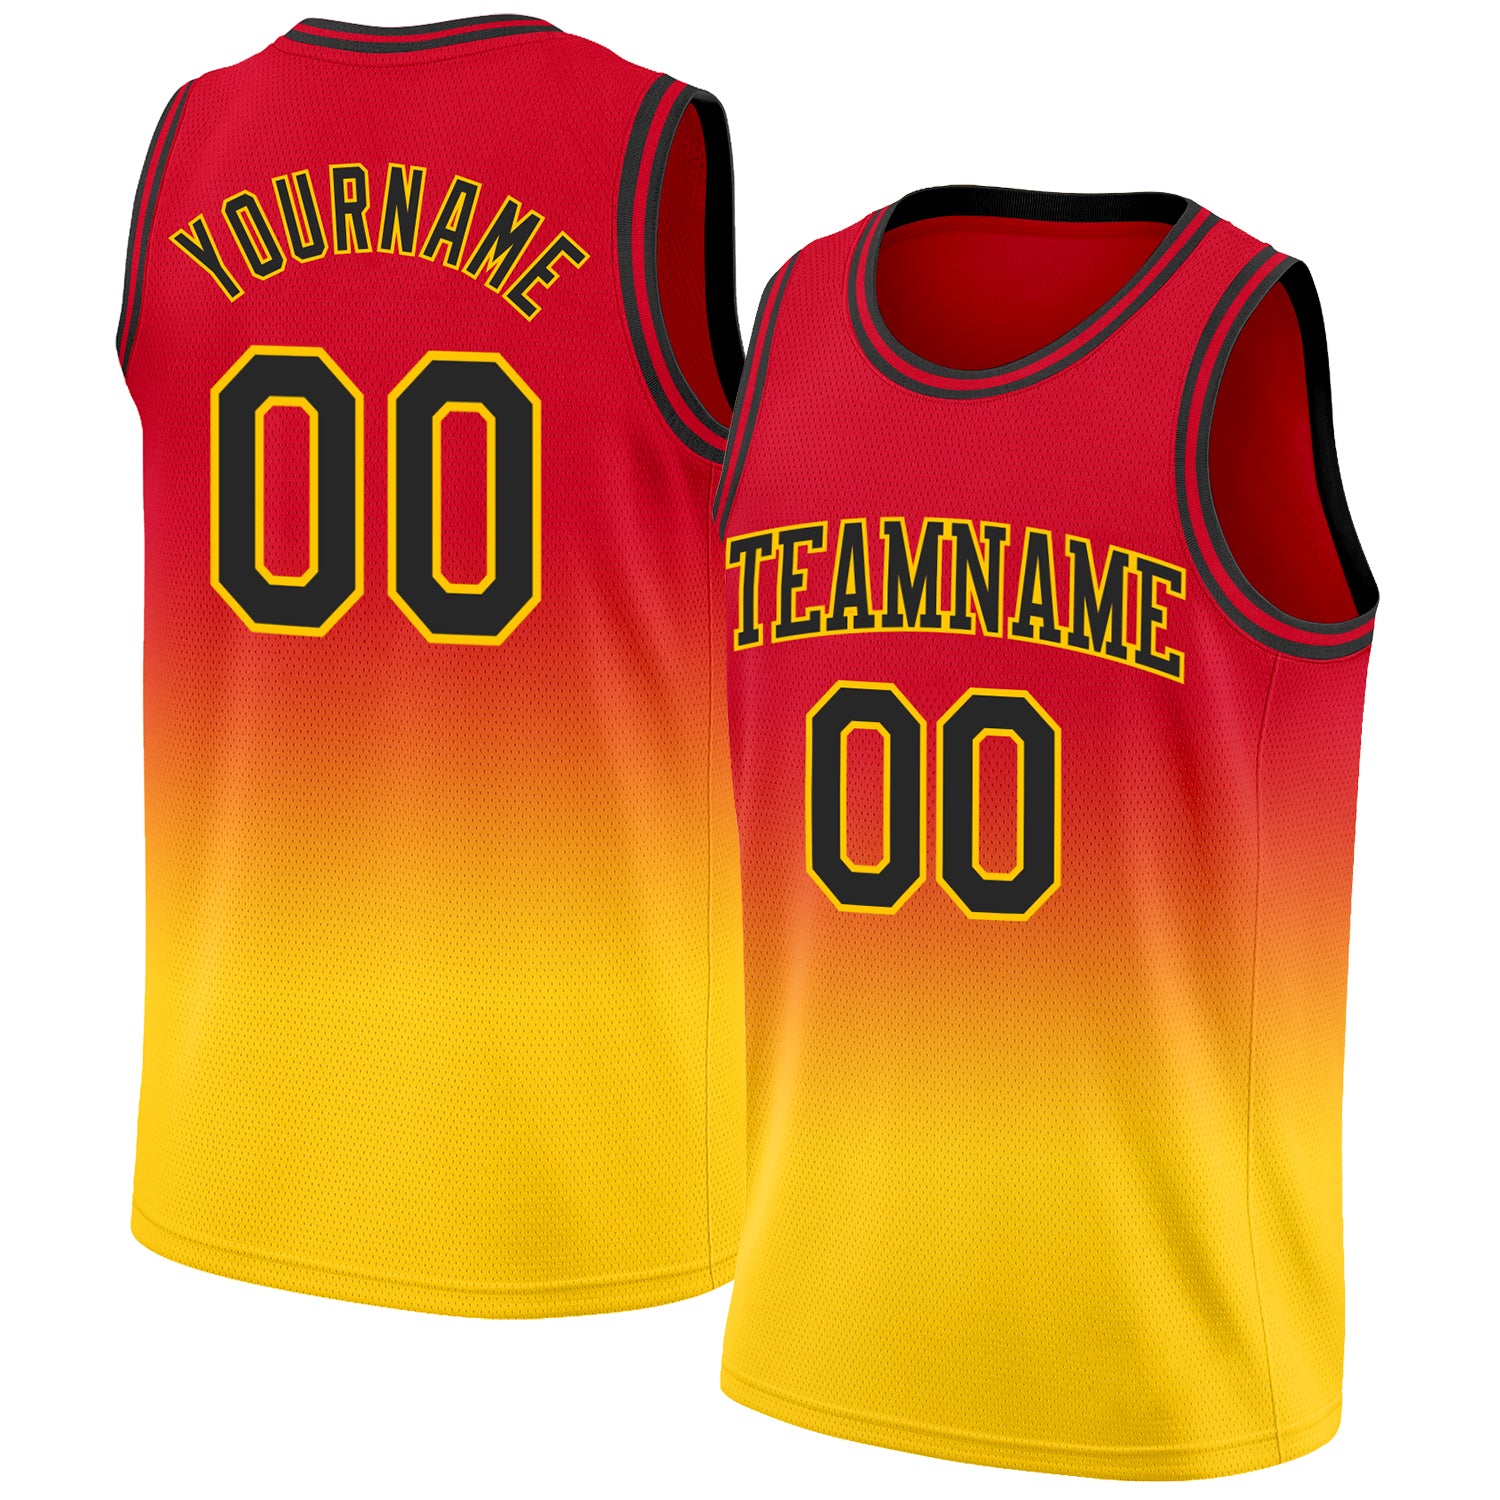 FIITG Custom Basketball Jersey Red Black-Gold Authentic Fade Fashion